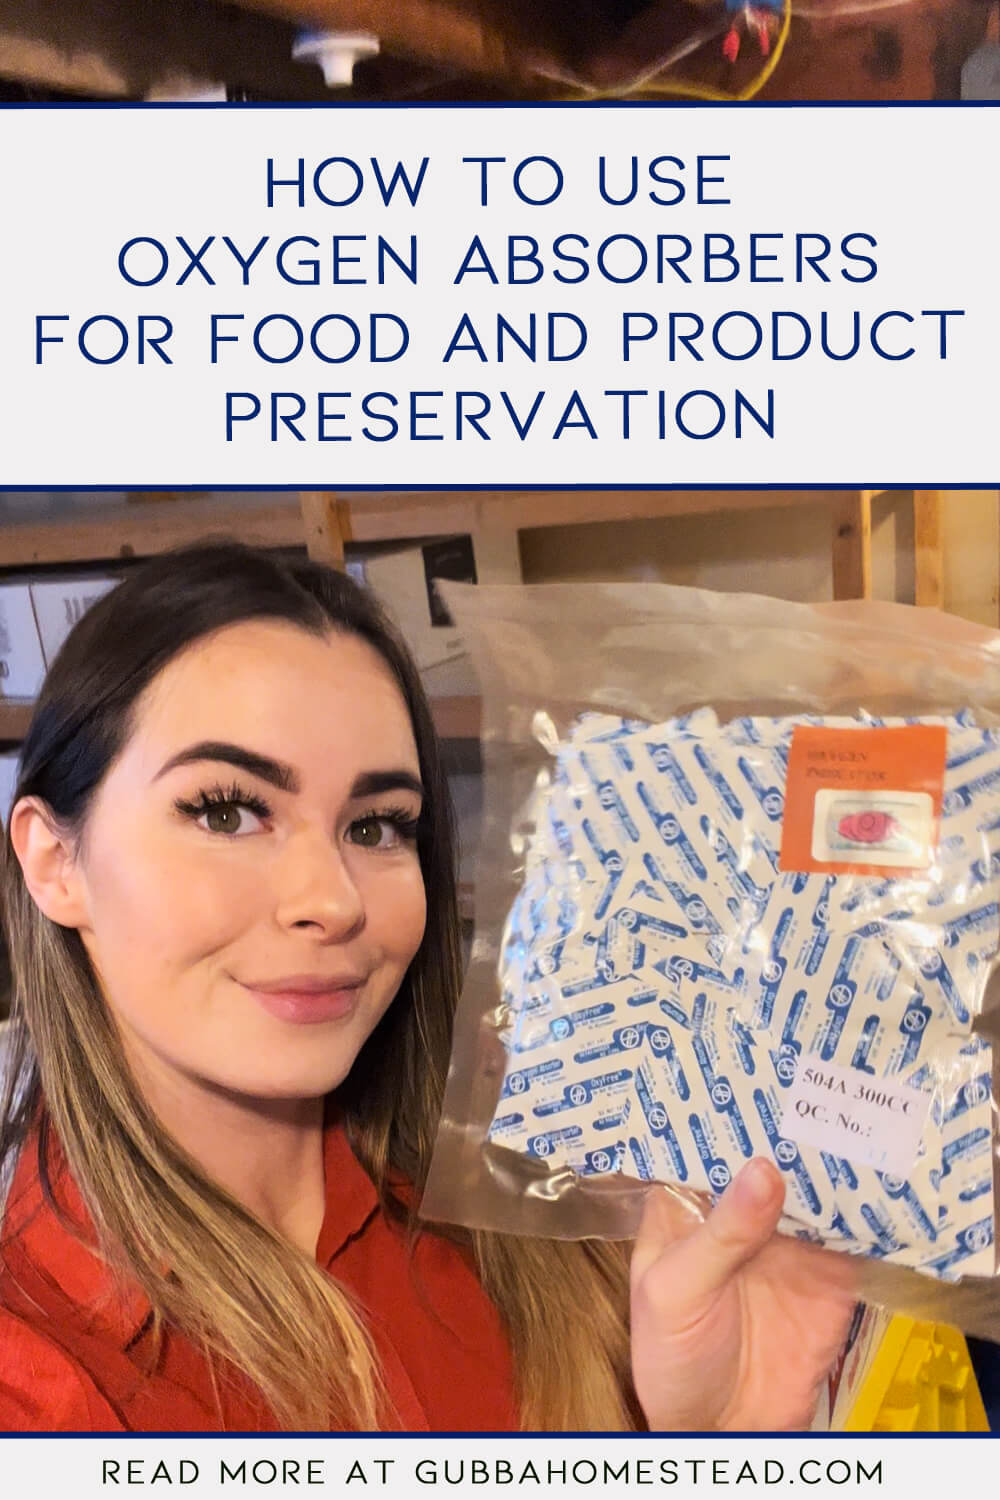 How to Use Oxygen Absorbers for Food and Product Preservation